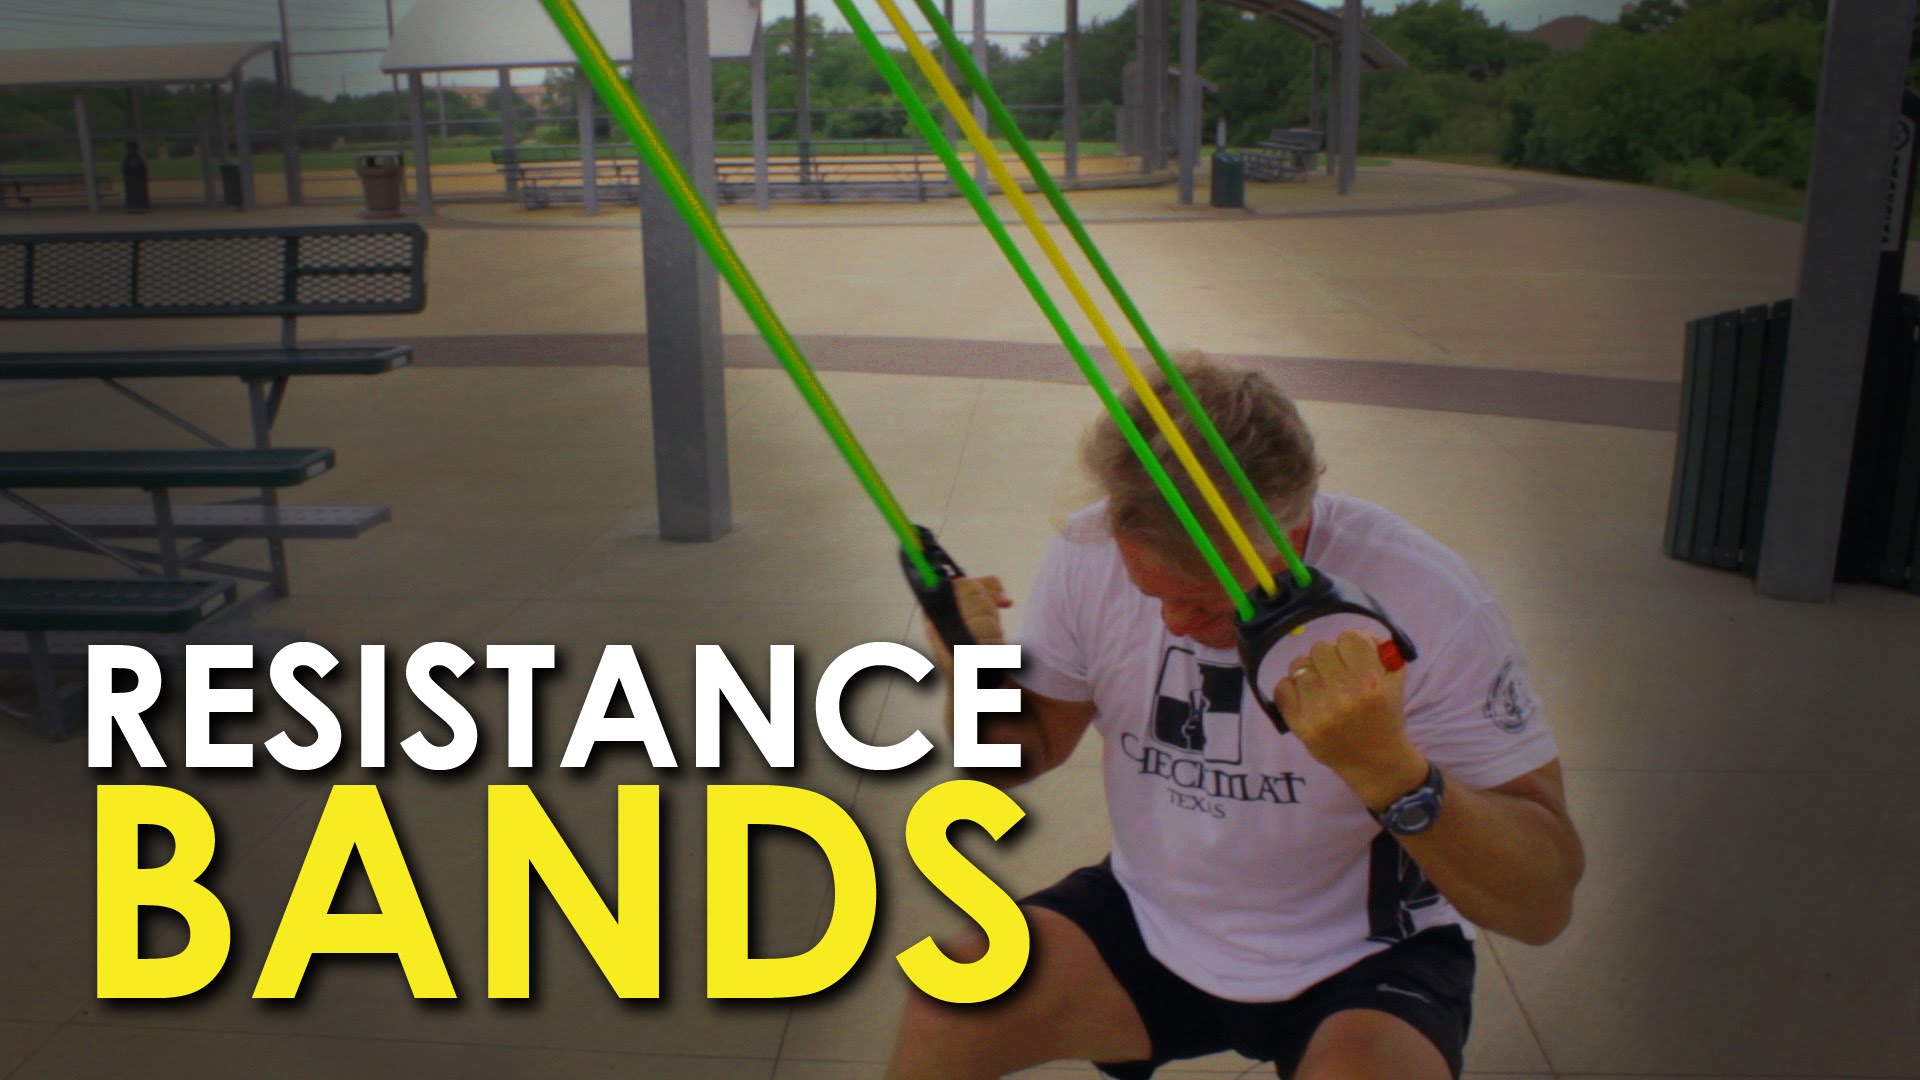 Looking for a comprehensive guide to resistance band training? Check out our VIDEO for tips on maximizing your workout with Resistance Bands.